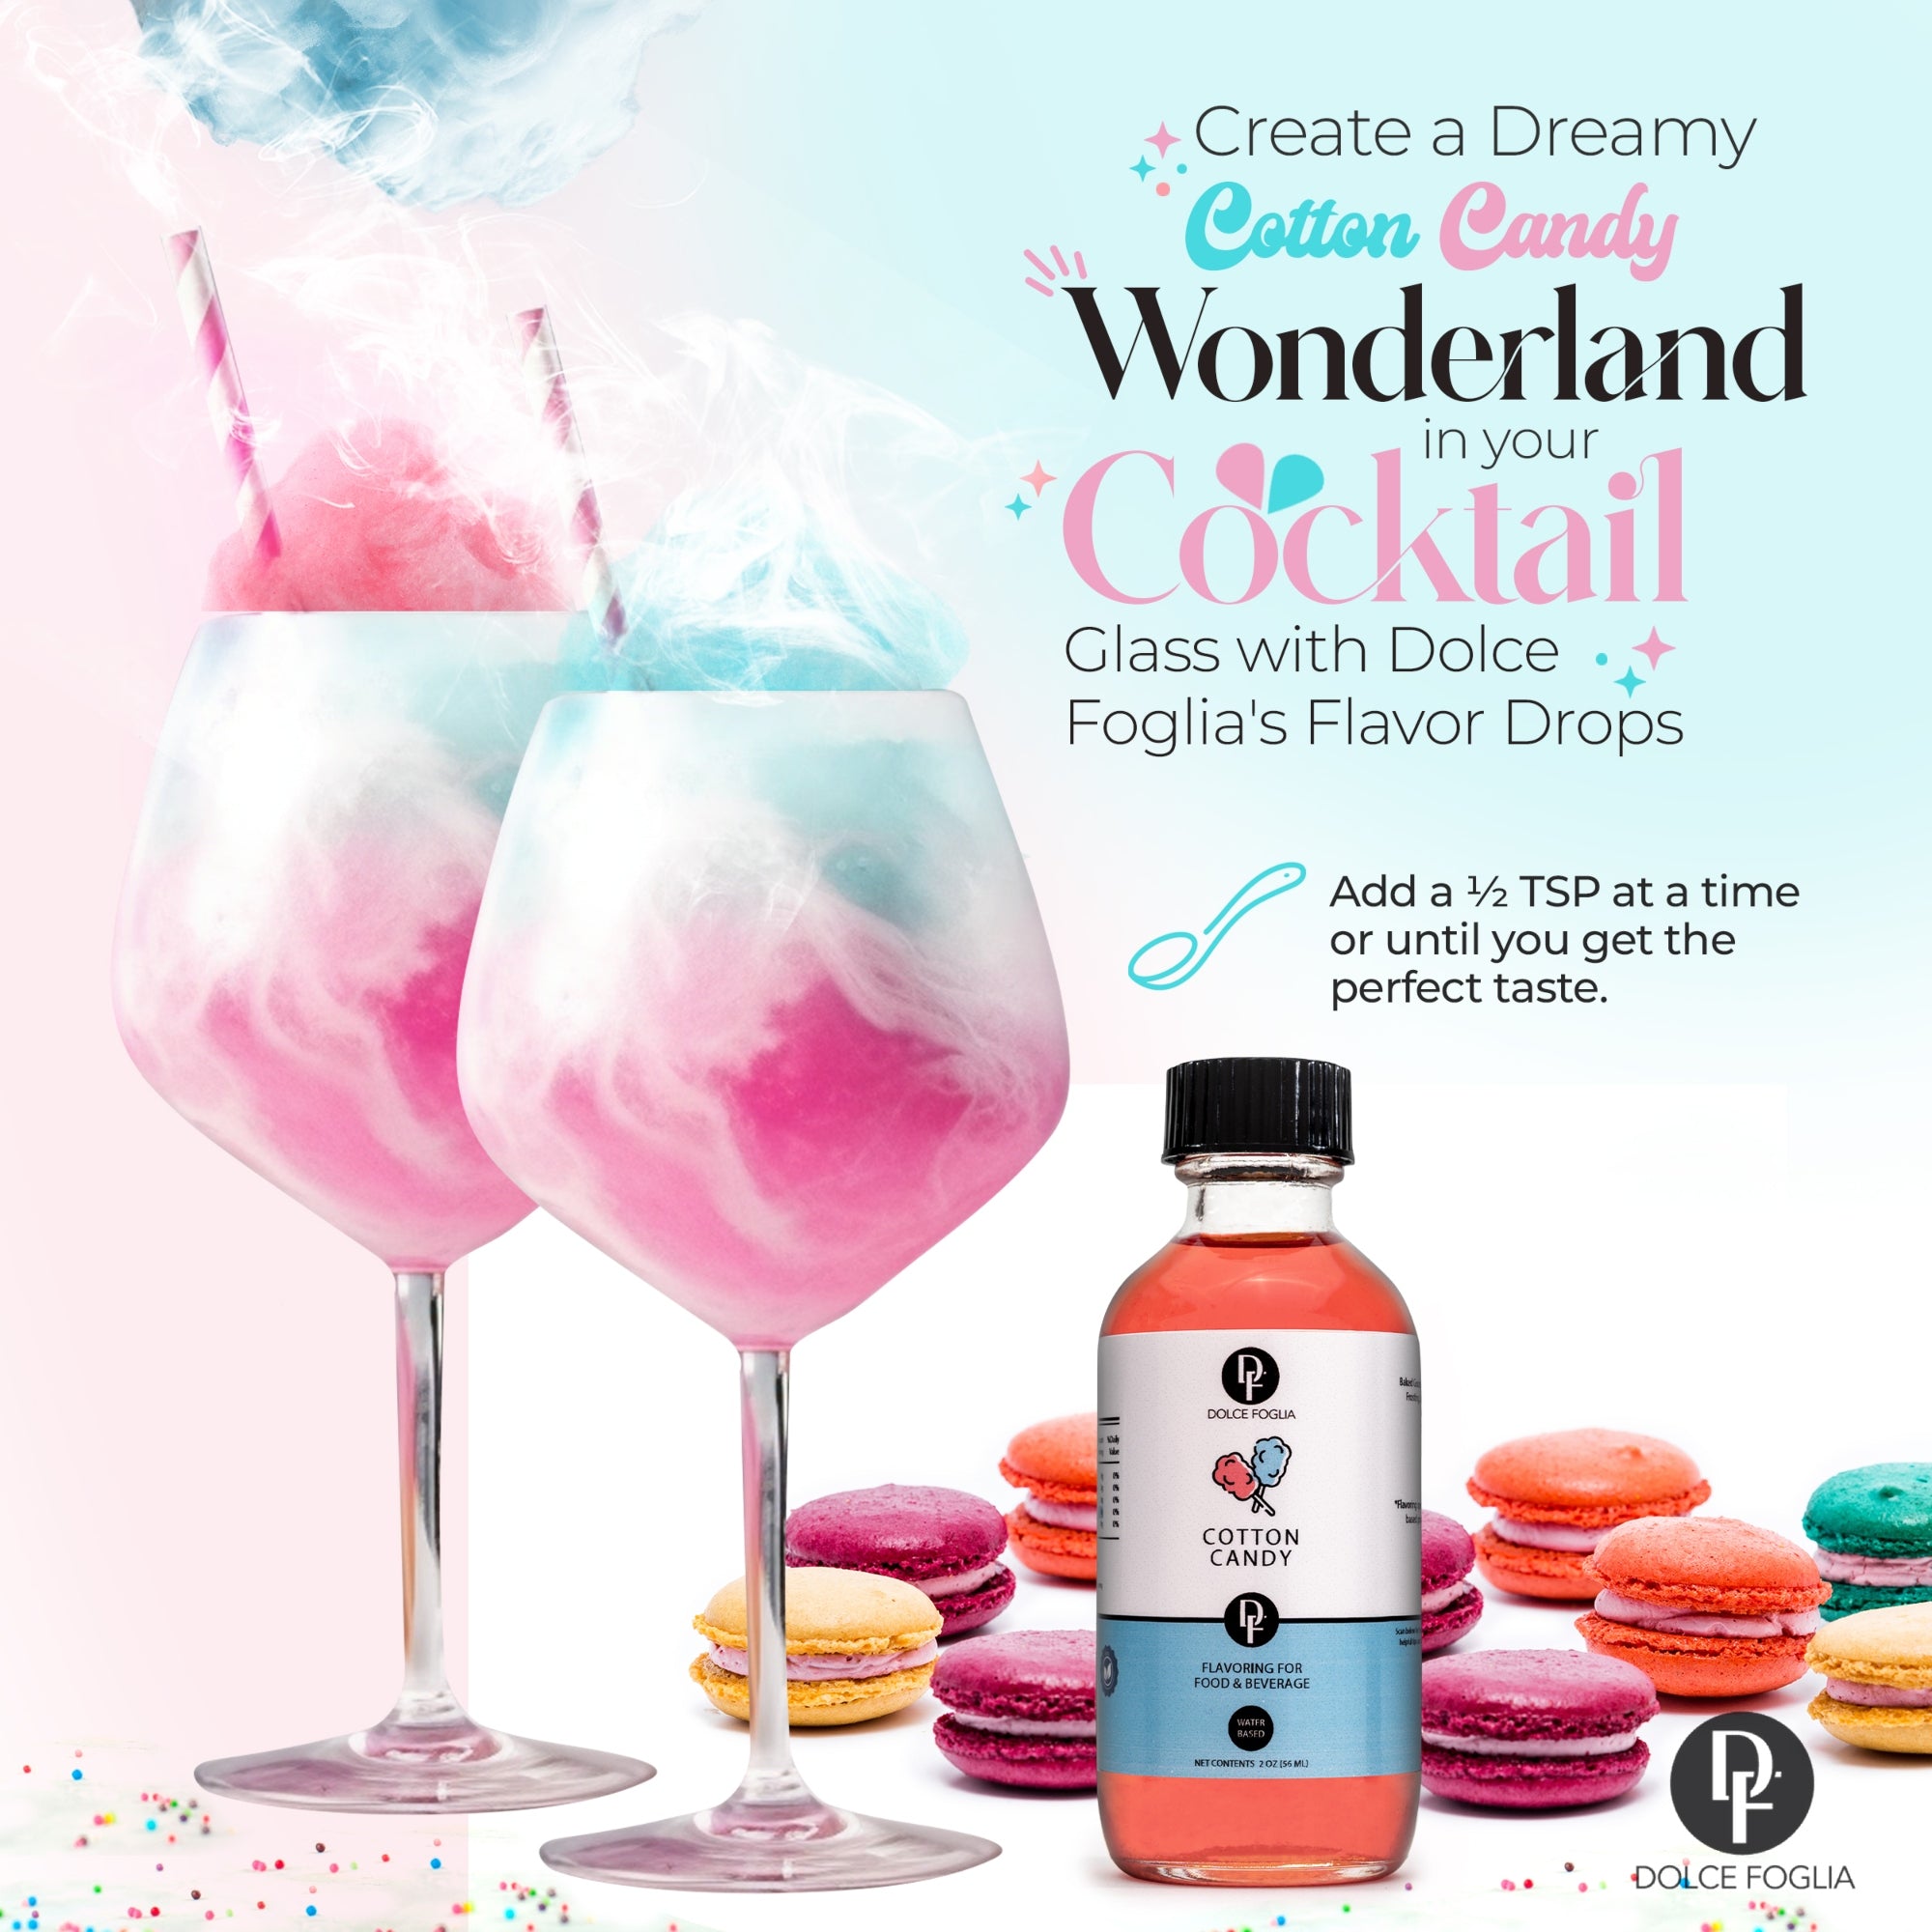 Kid-Friendly Cotton Candy Drink with Dolce Foglia